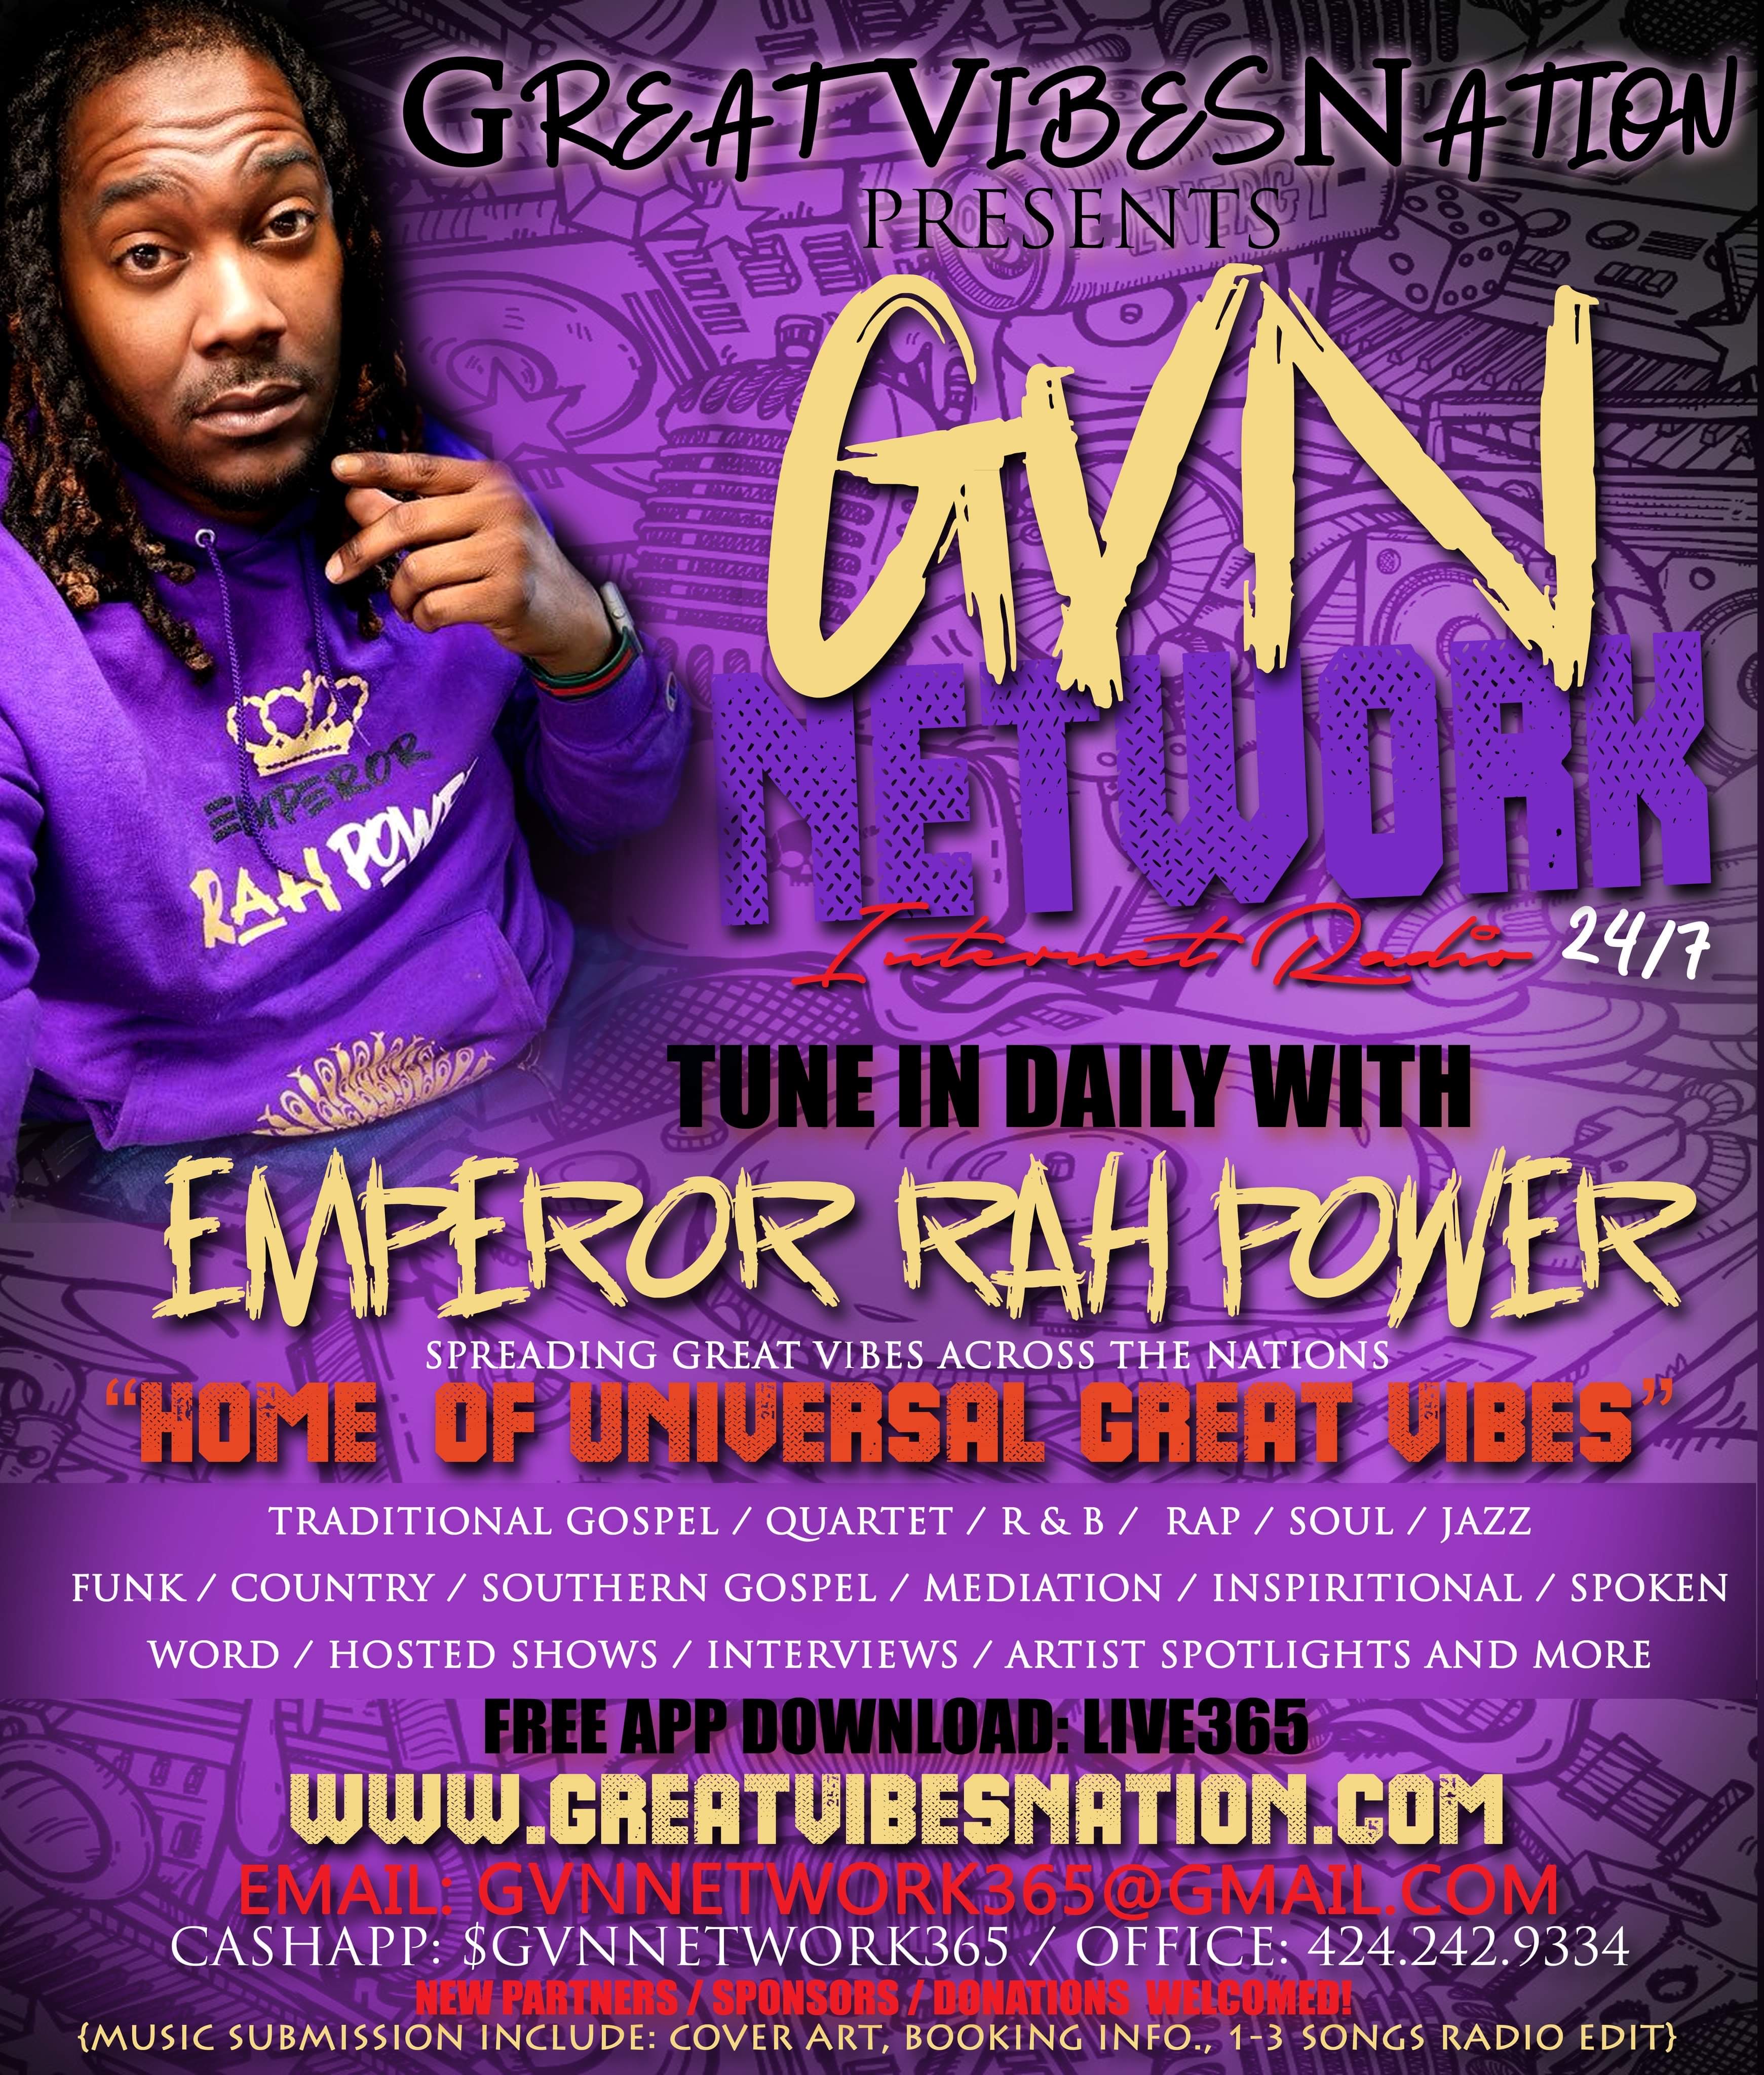 Art for GVNNETWORKPROMO by Brotha B